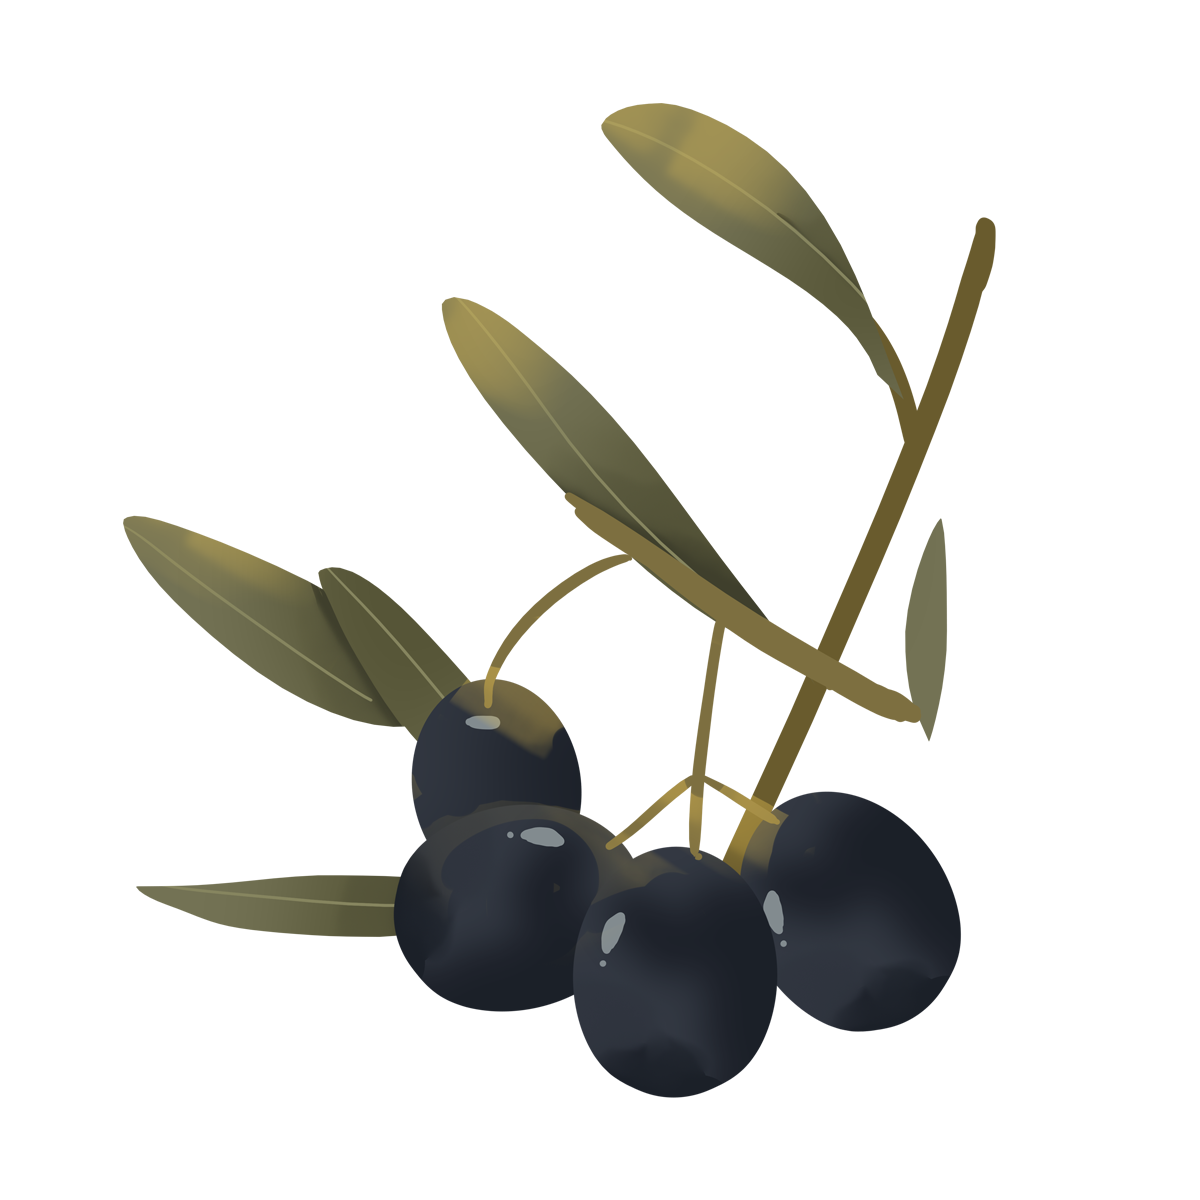 Olives PNG Photos